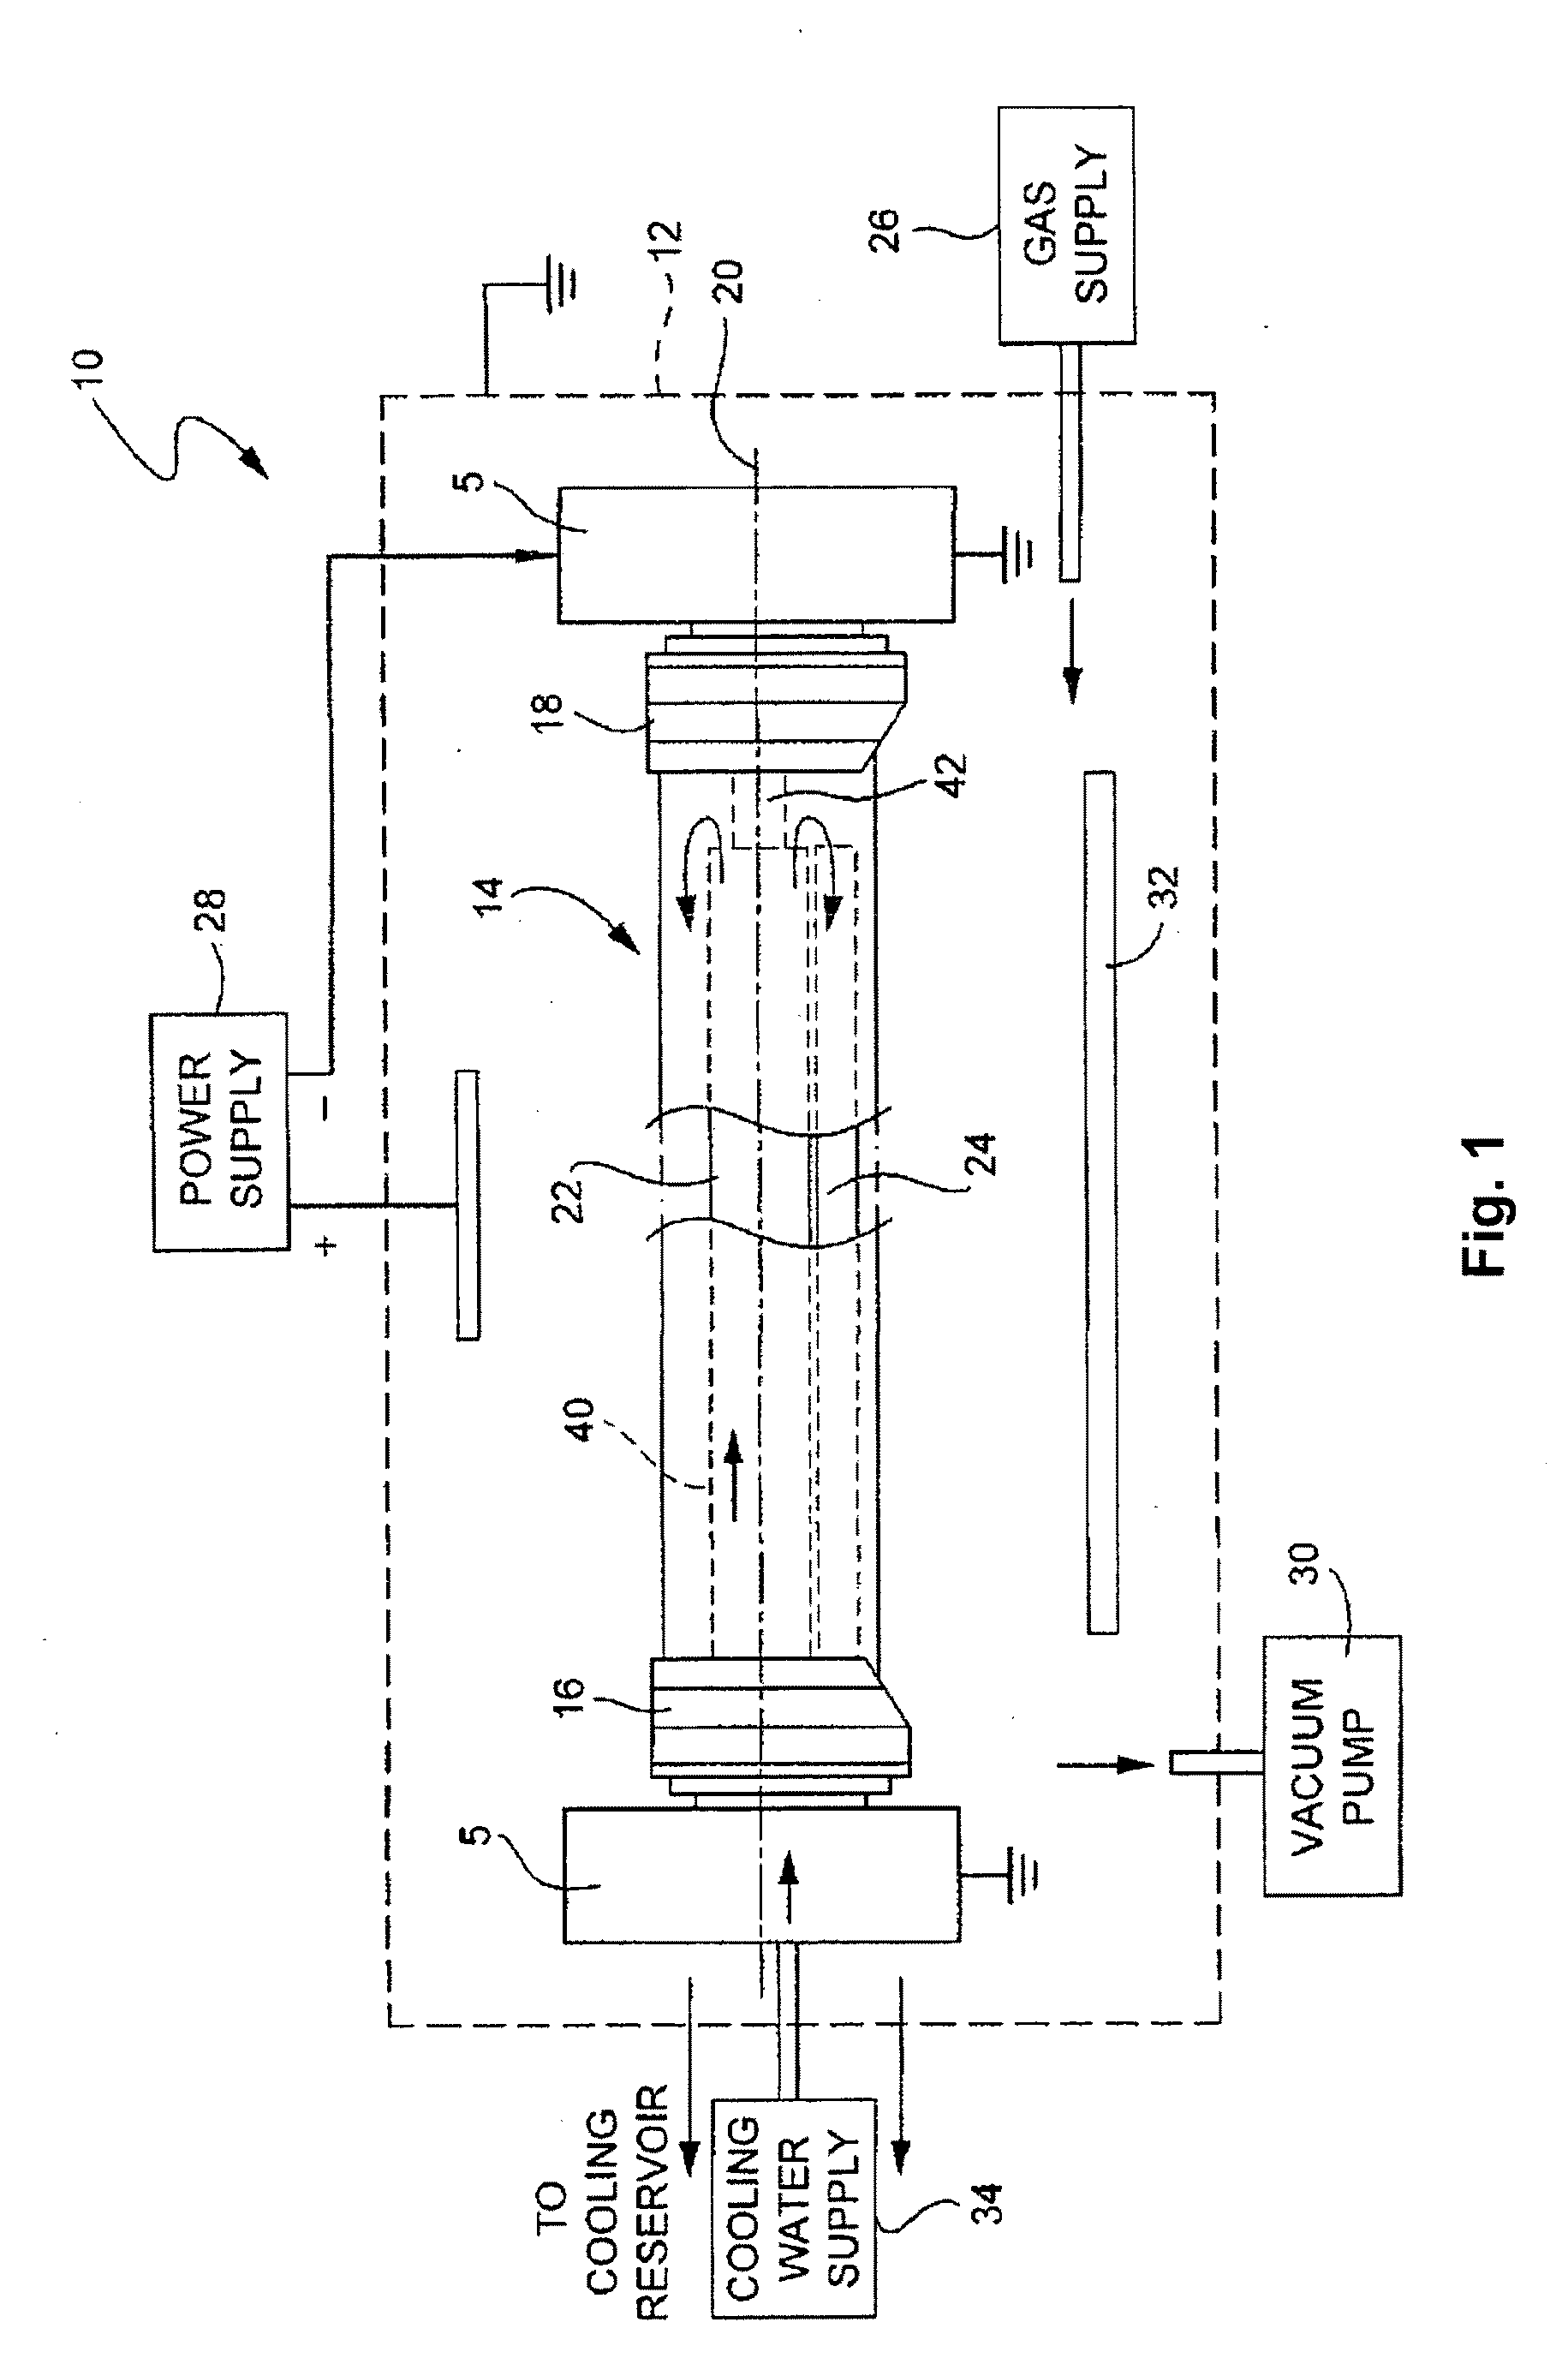 Techniques for depositing transparent conductive oxide coatings using dual C-MAG sputter apparatuses